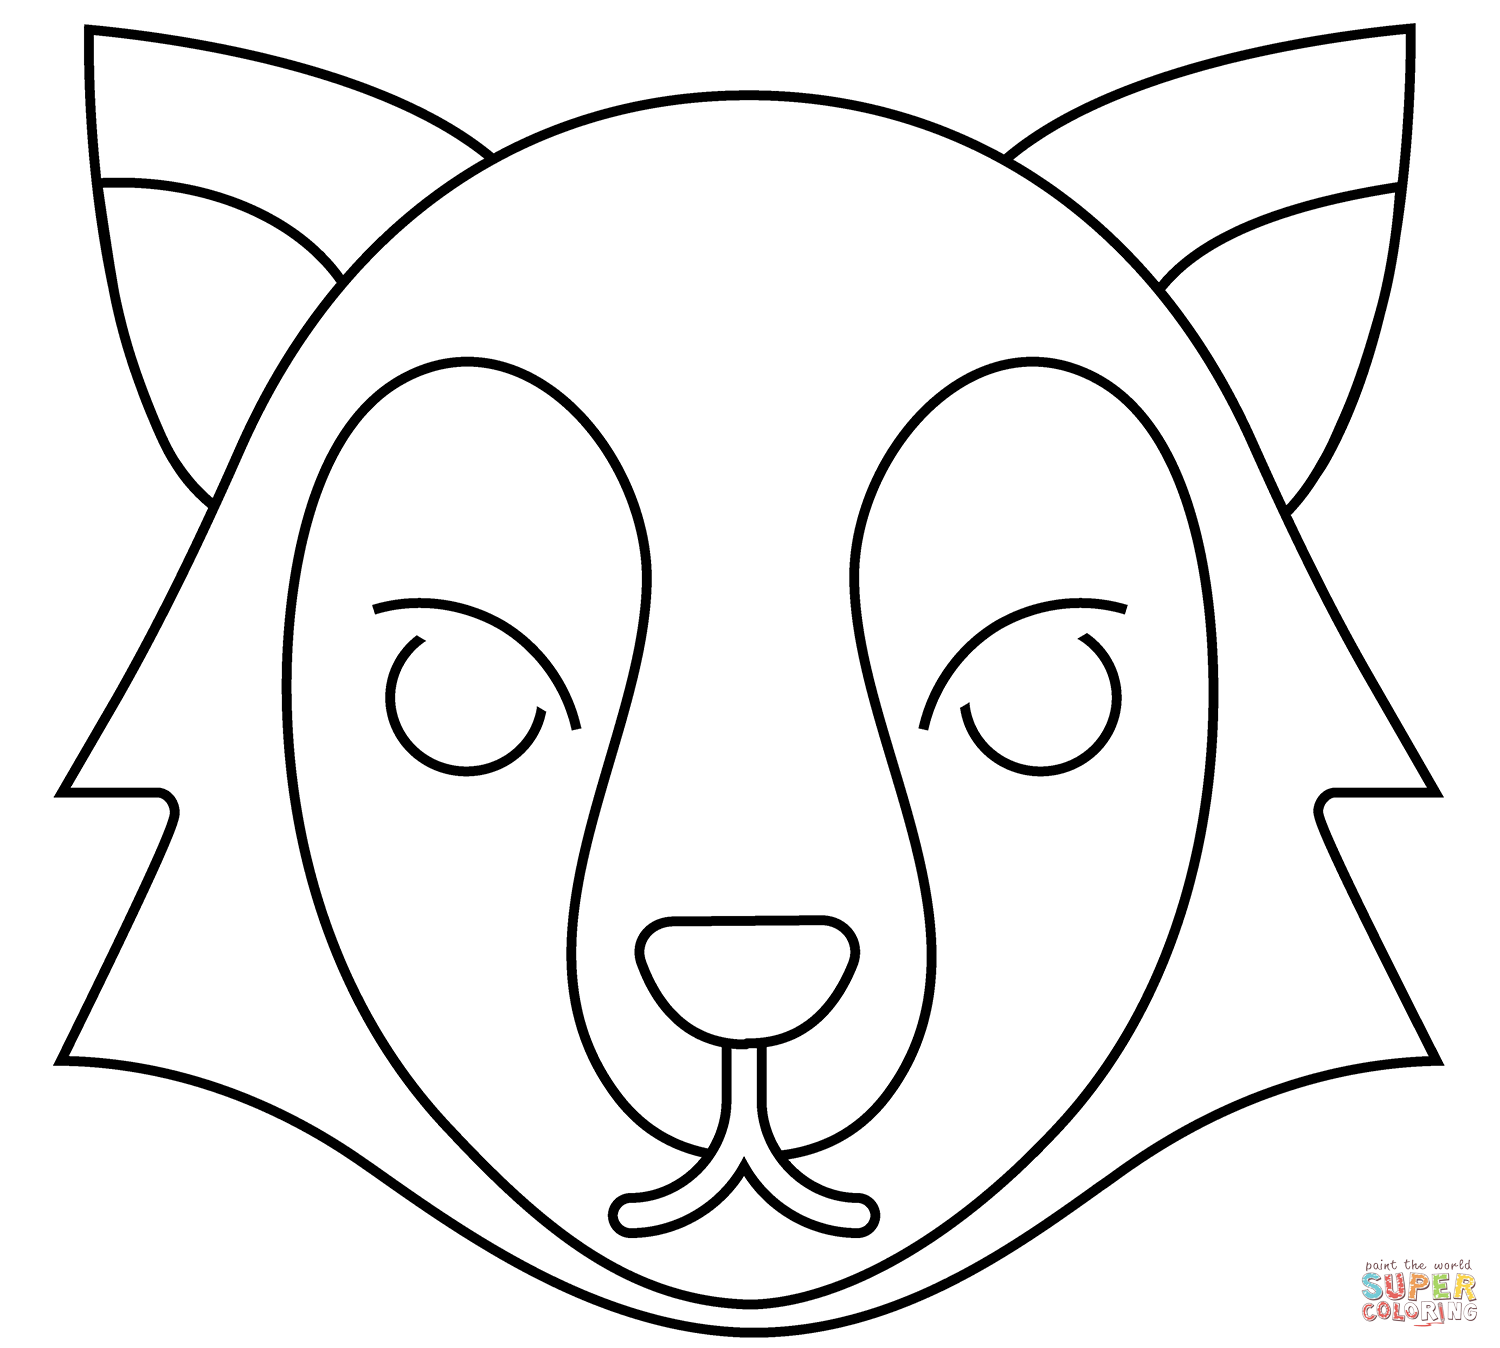 Wolf emoji coloring page free printable coloring pages